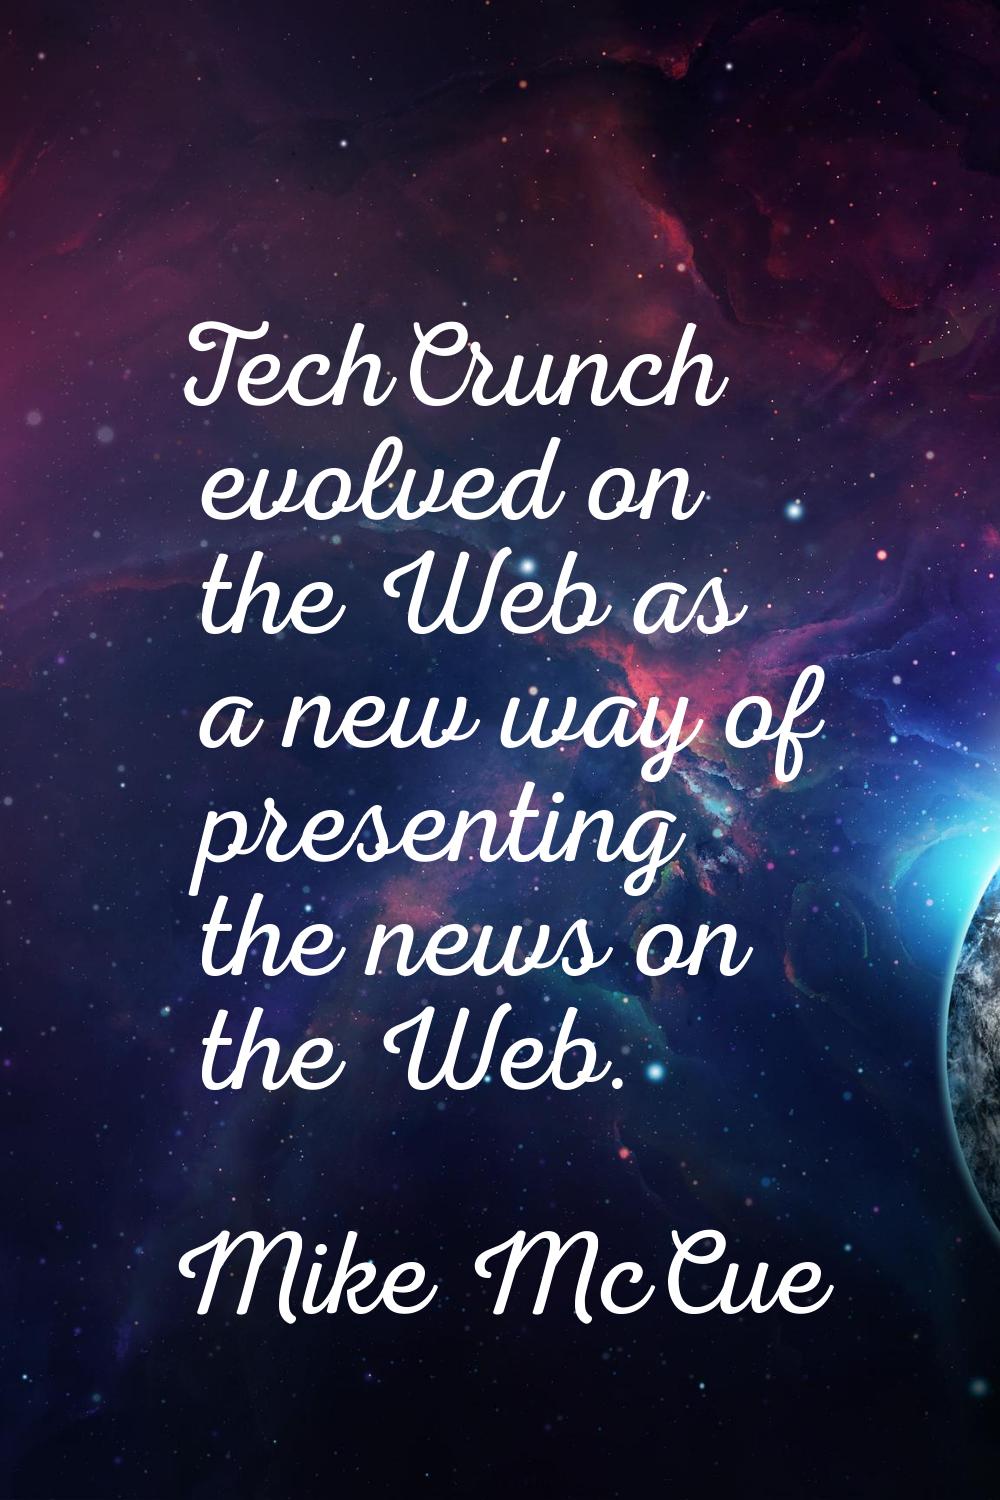 TechCrunch evolved on the Web as a new way of presenting the news on the Web.